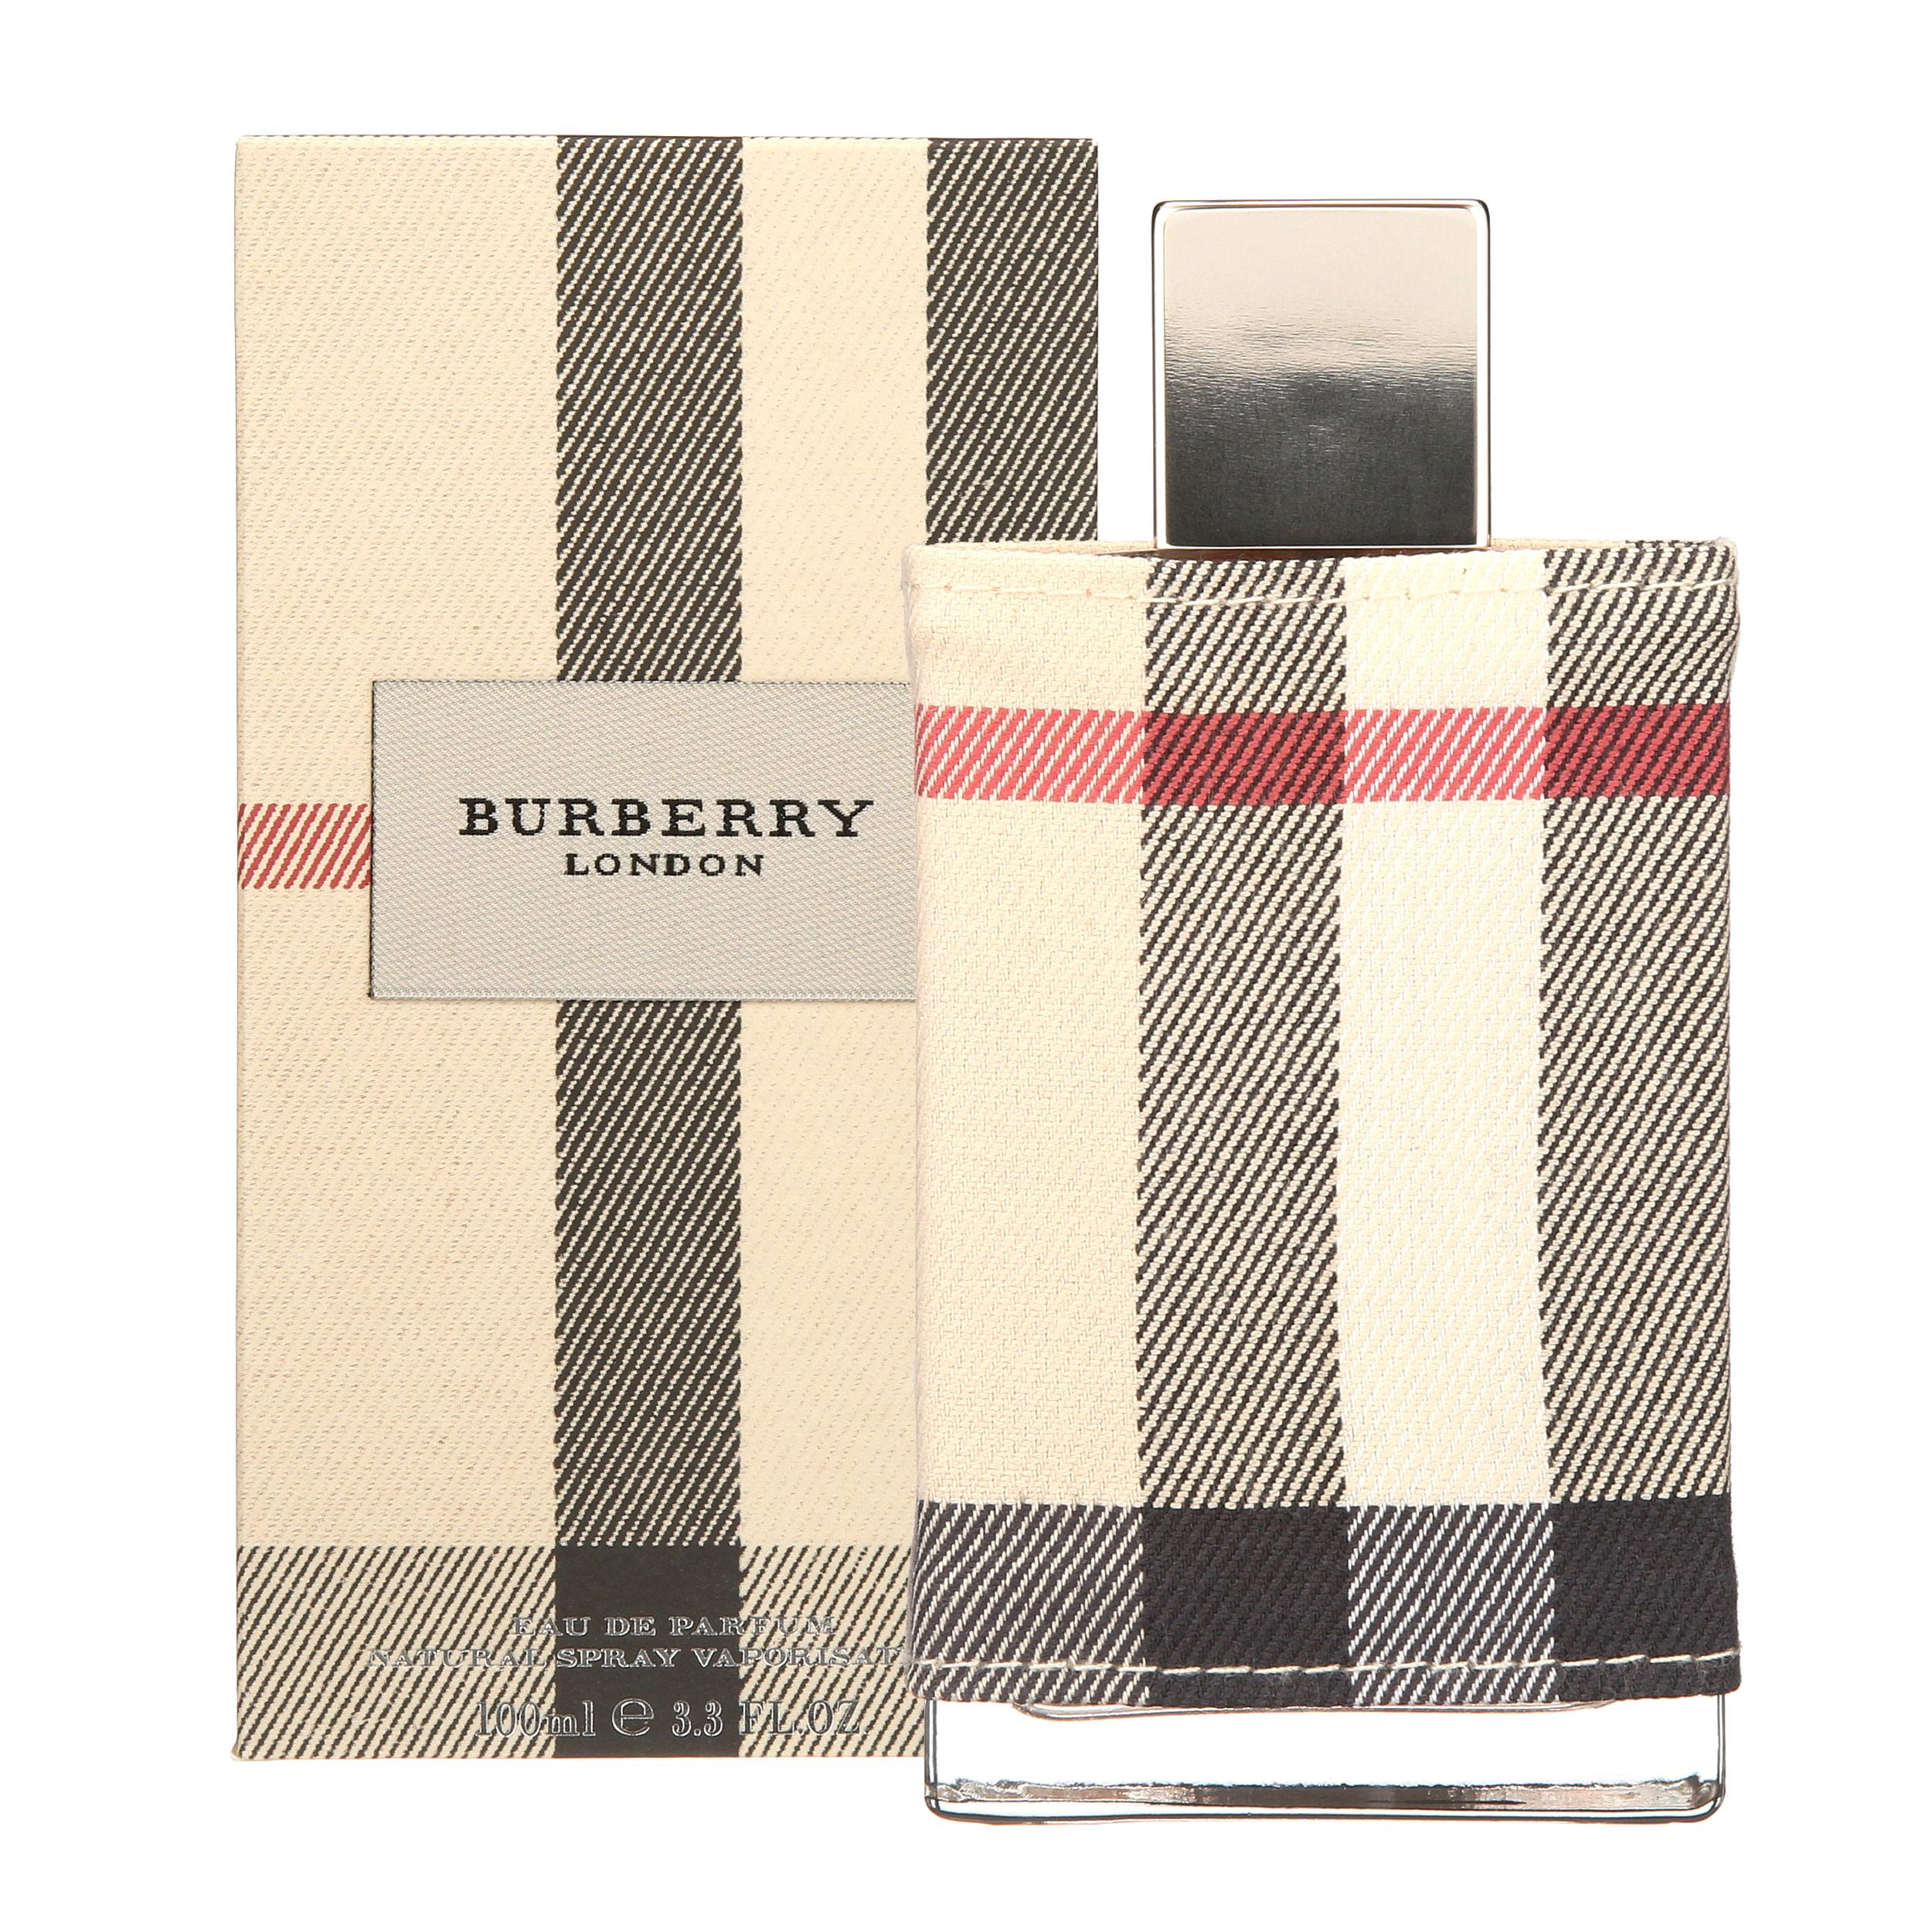 burberry london limited